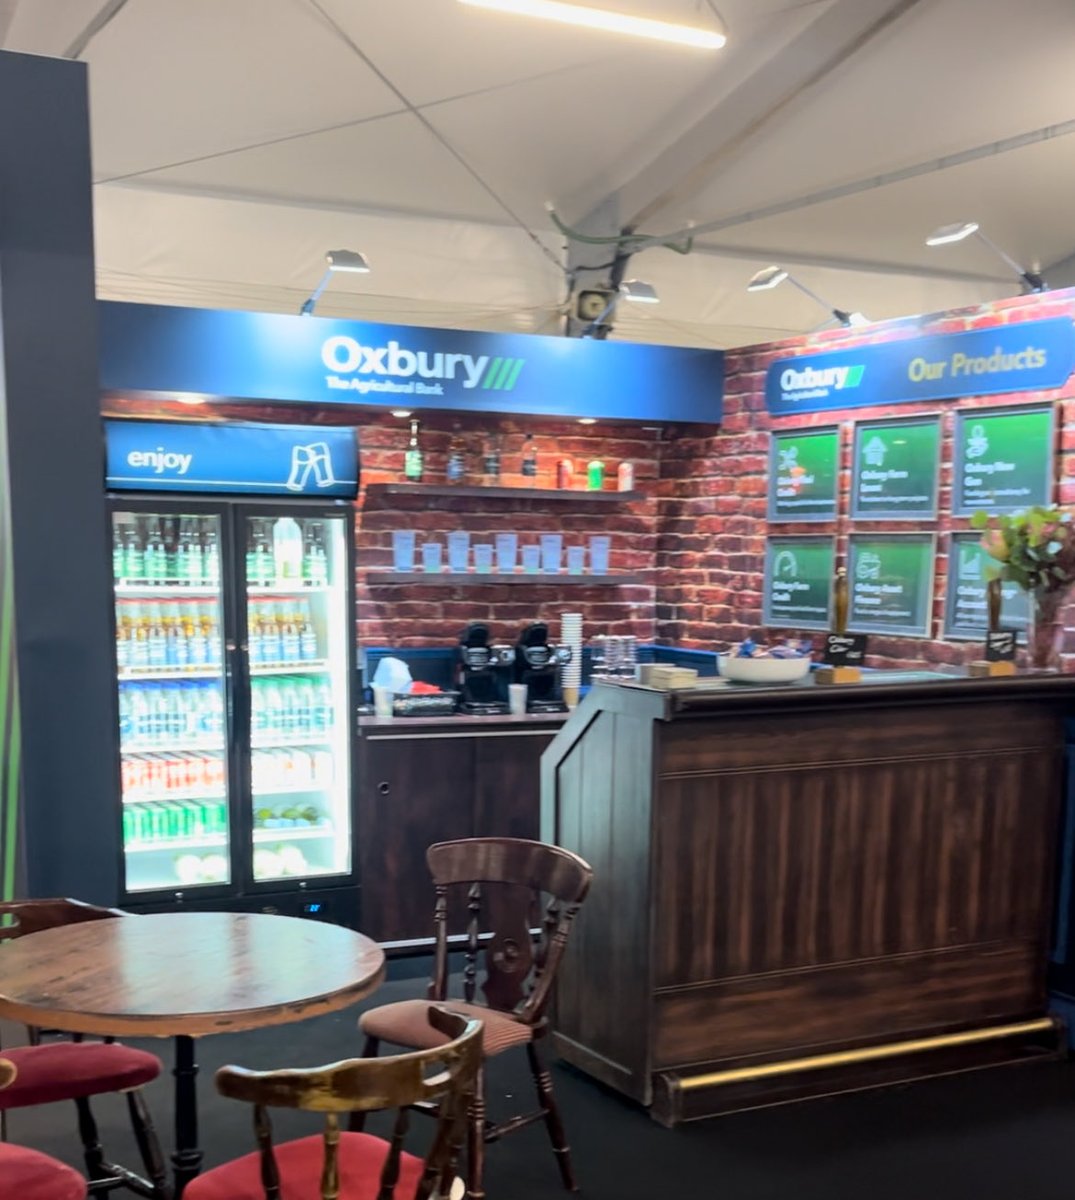 Latest stand build for clients at the ‘dairy tech’ show, Stoneleigh, Coventry. Client pleased with the results and we wish them well at today’s show. #Design #Print #Events #Marketing 01244399900